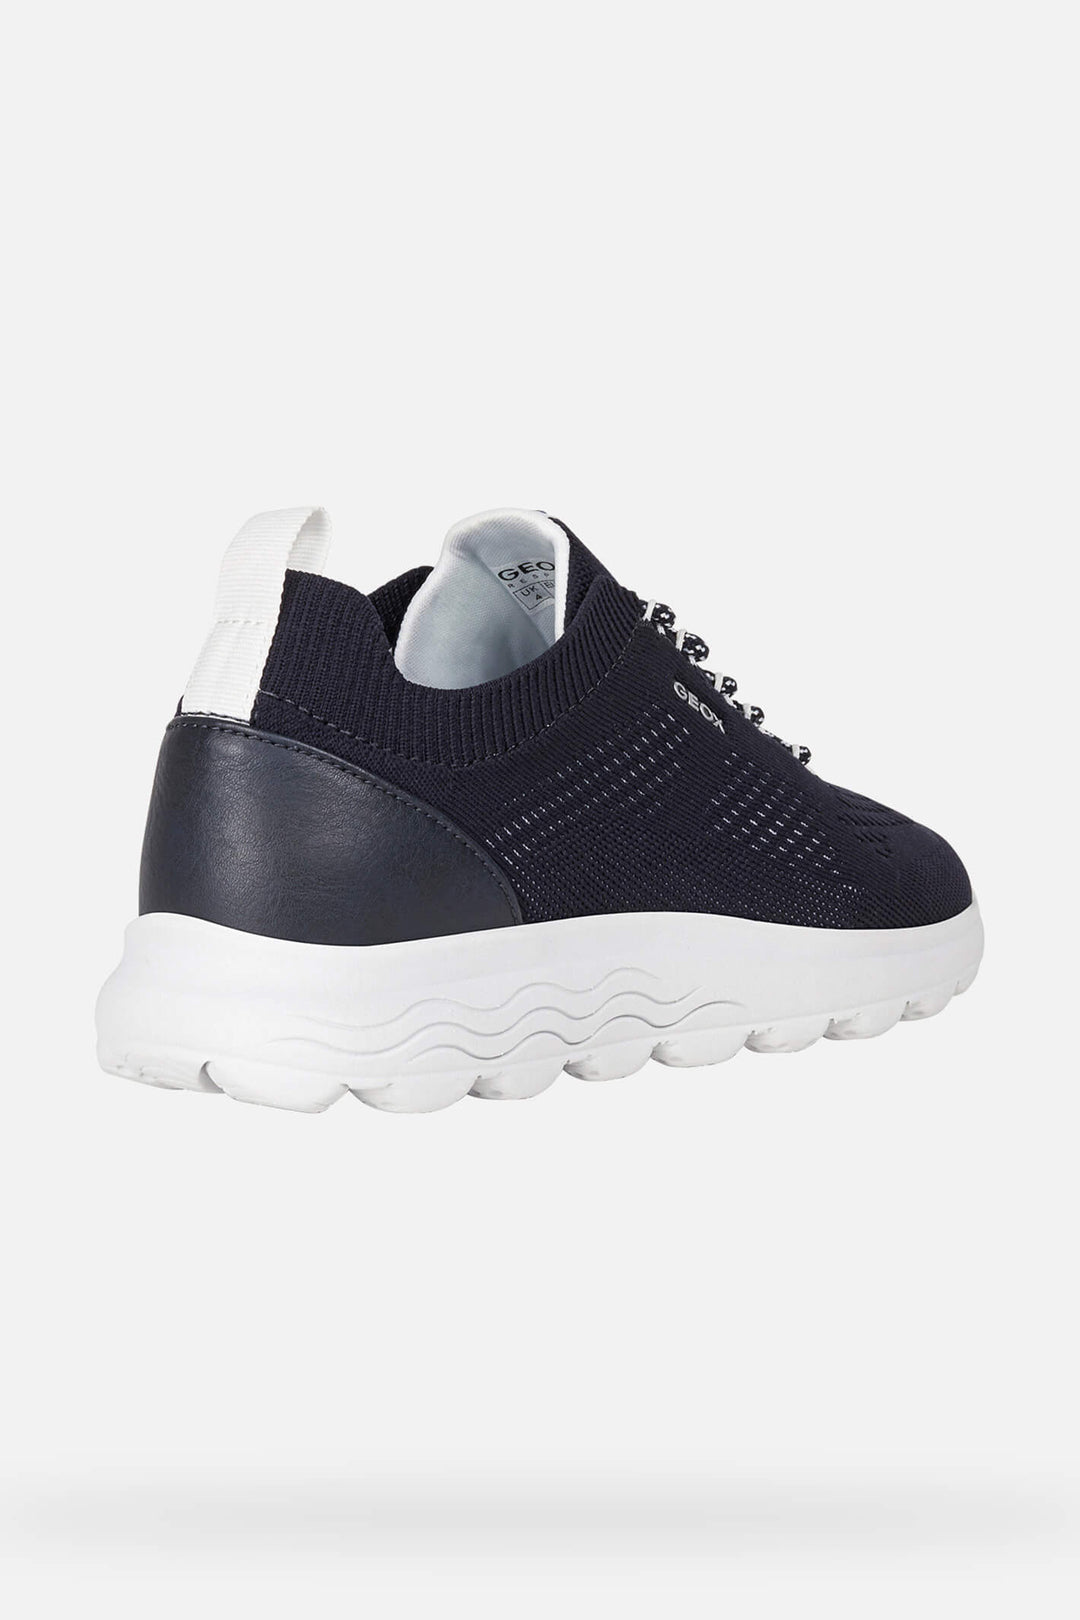 Geox Spherica D15NUA0006KC4002 Knitted Navy Trainer - Shirley Allum Boutique